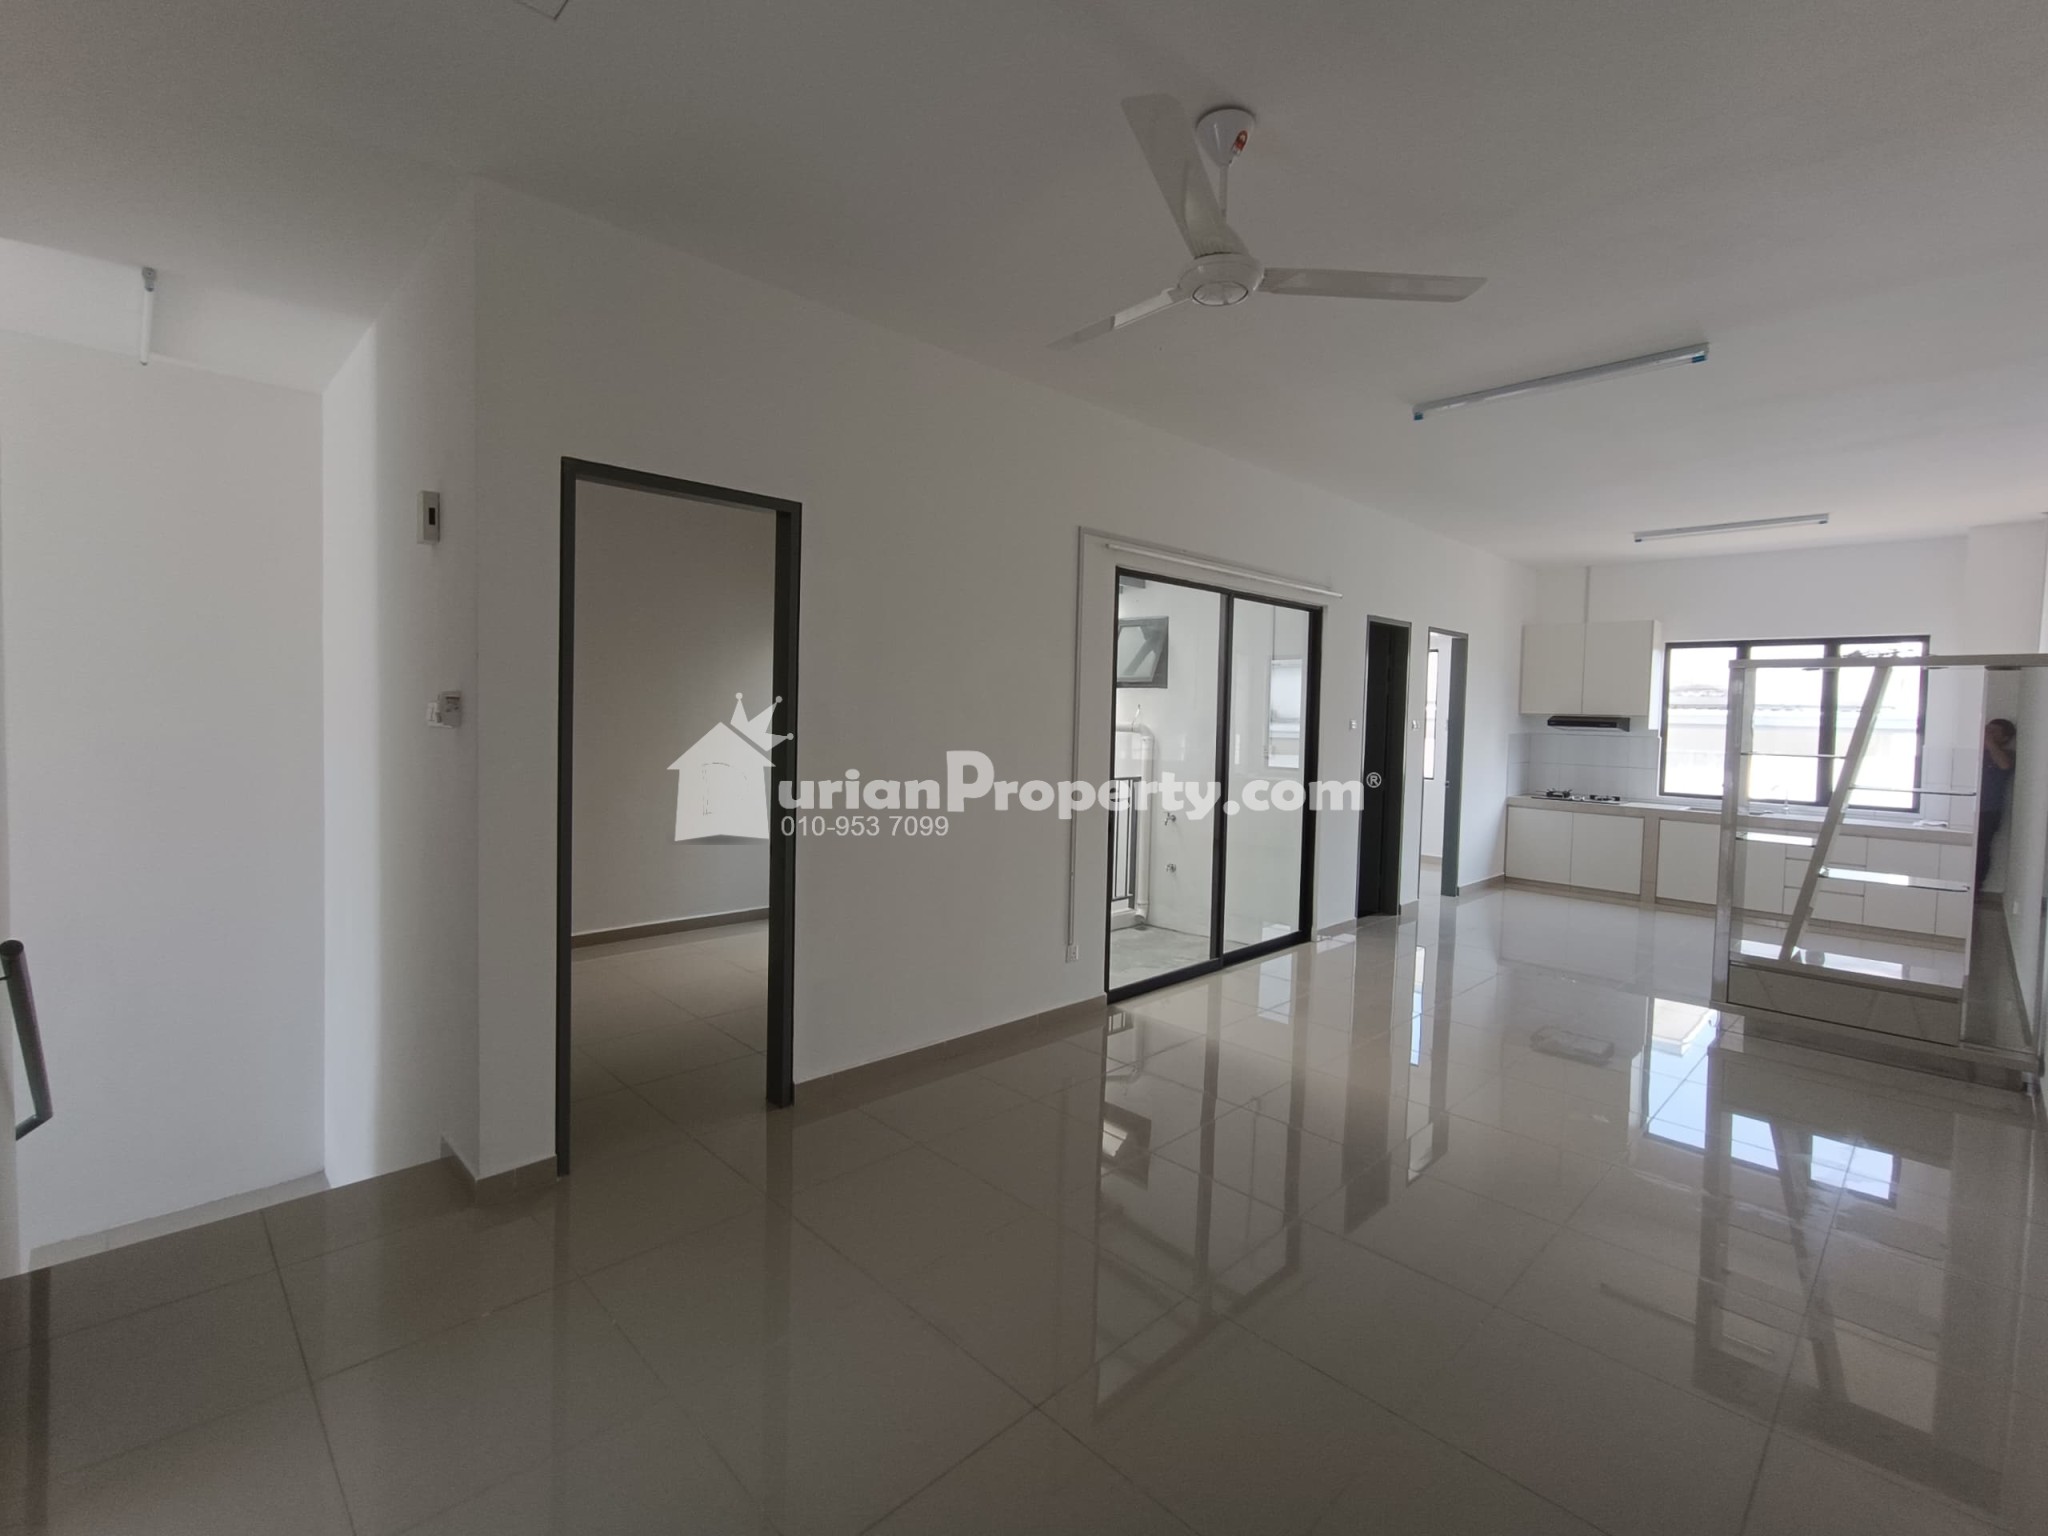 Townhouse For Rent at Lambaian Residence